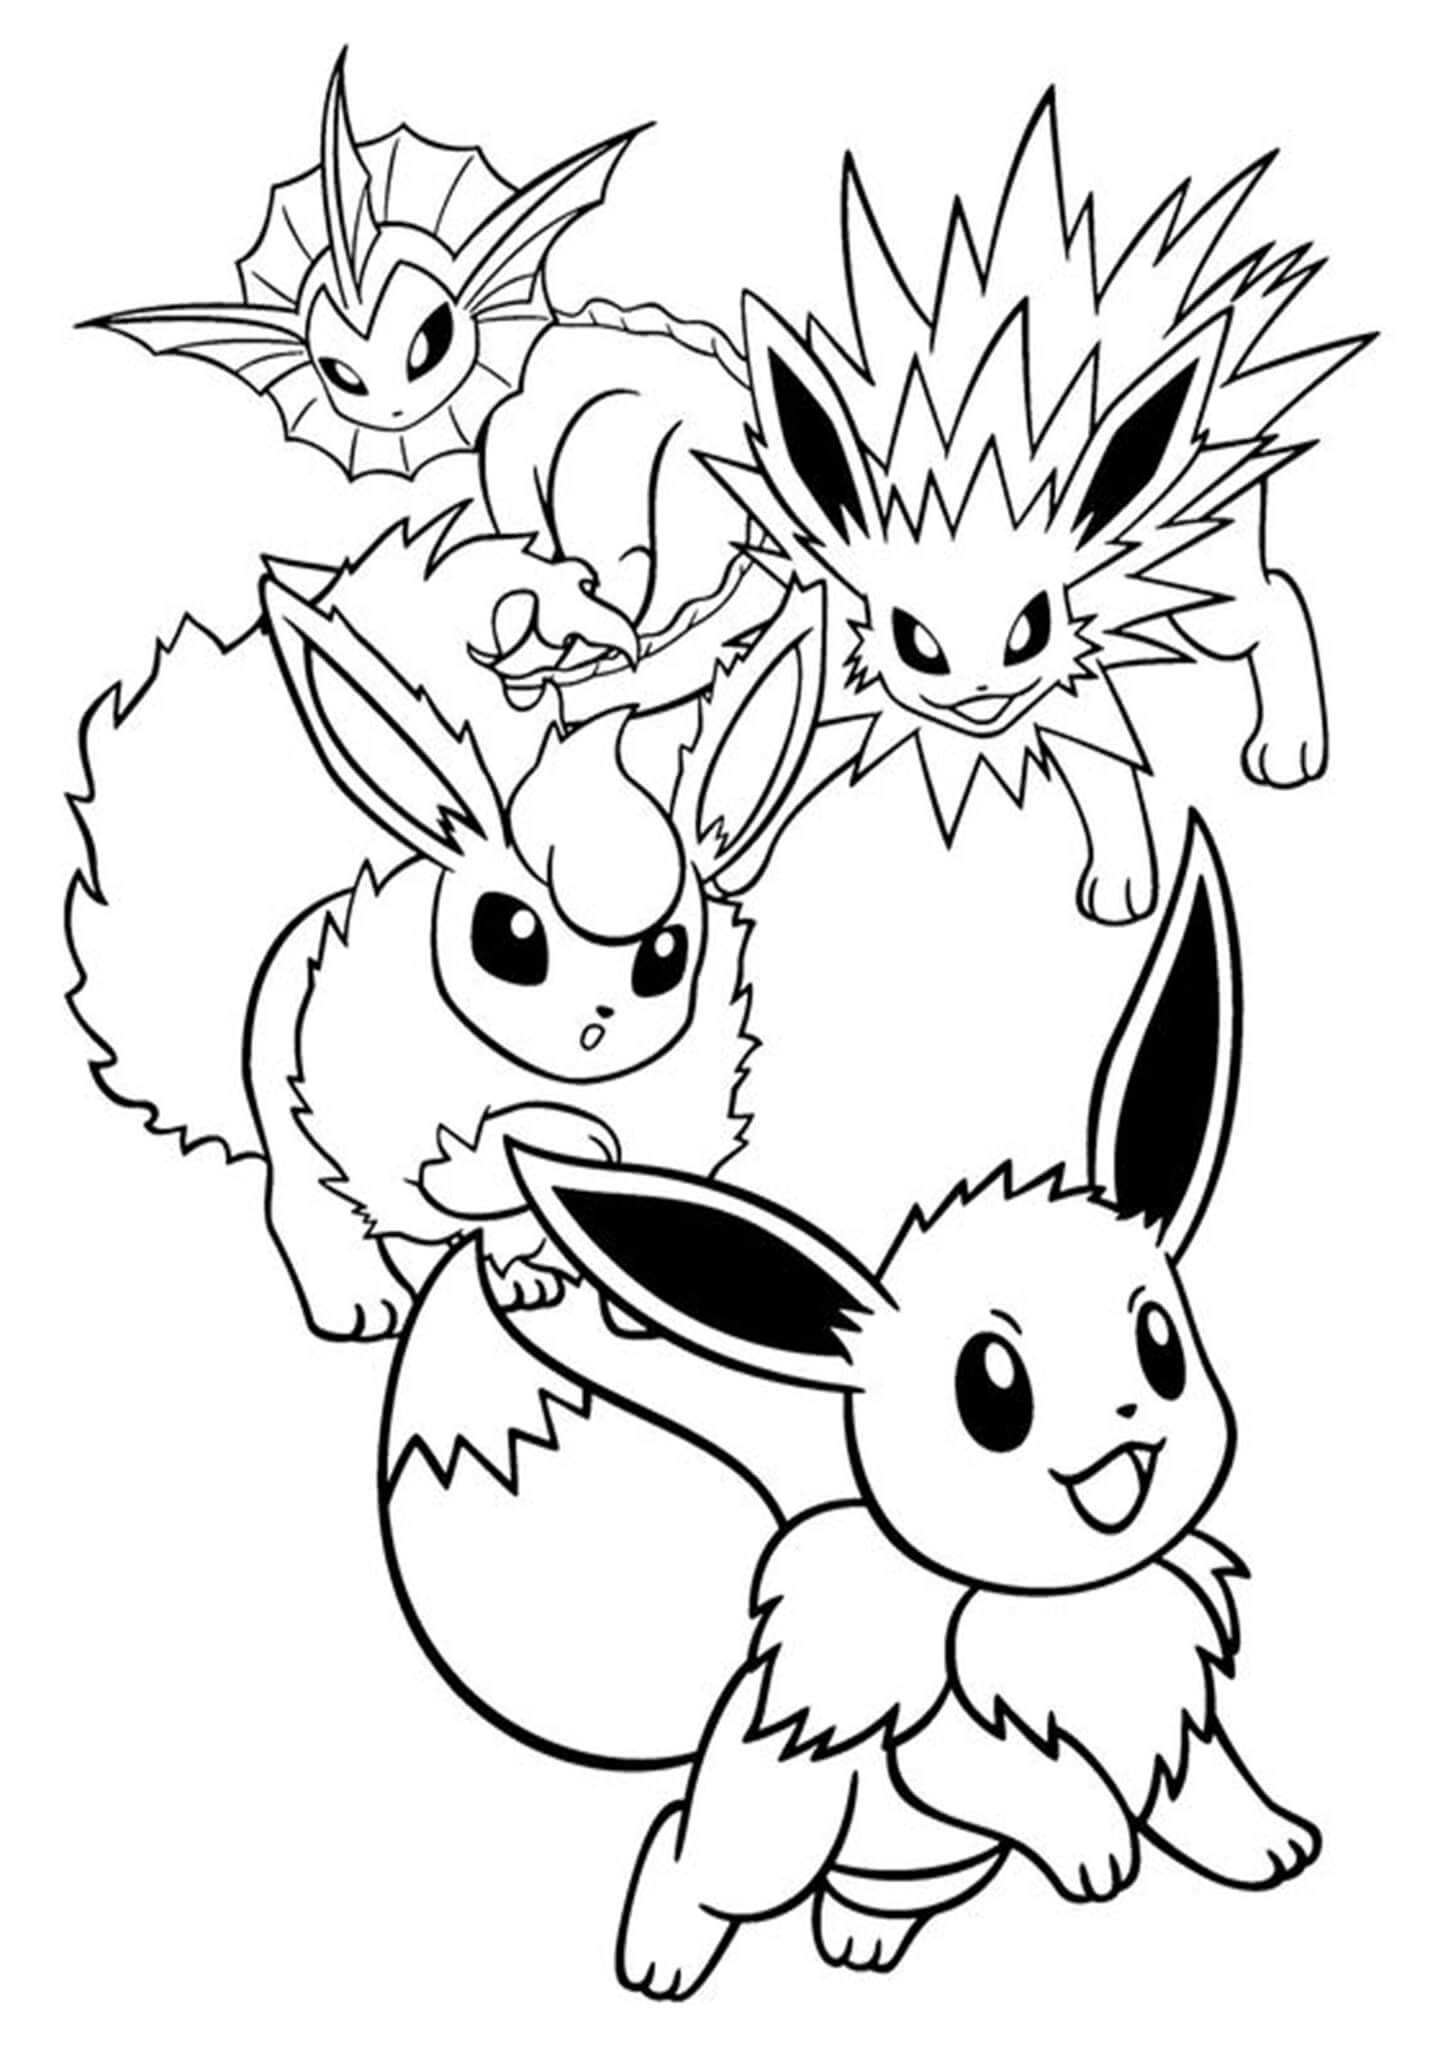 Free easy to print eevee coloring pages pokemon coloring pages pikachu coloring page pokemon coloring